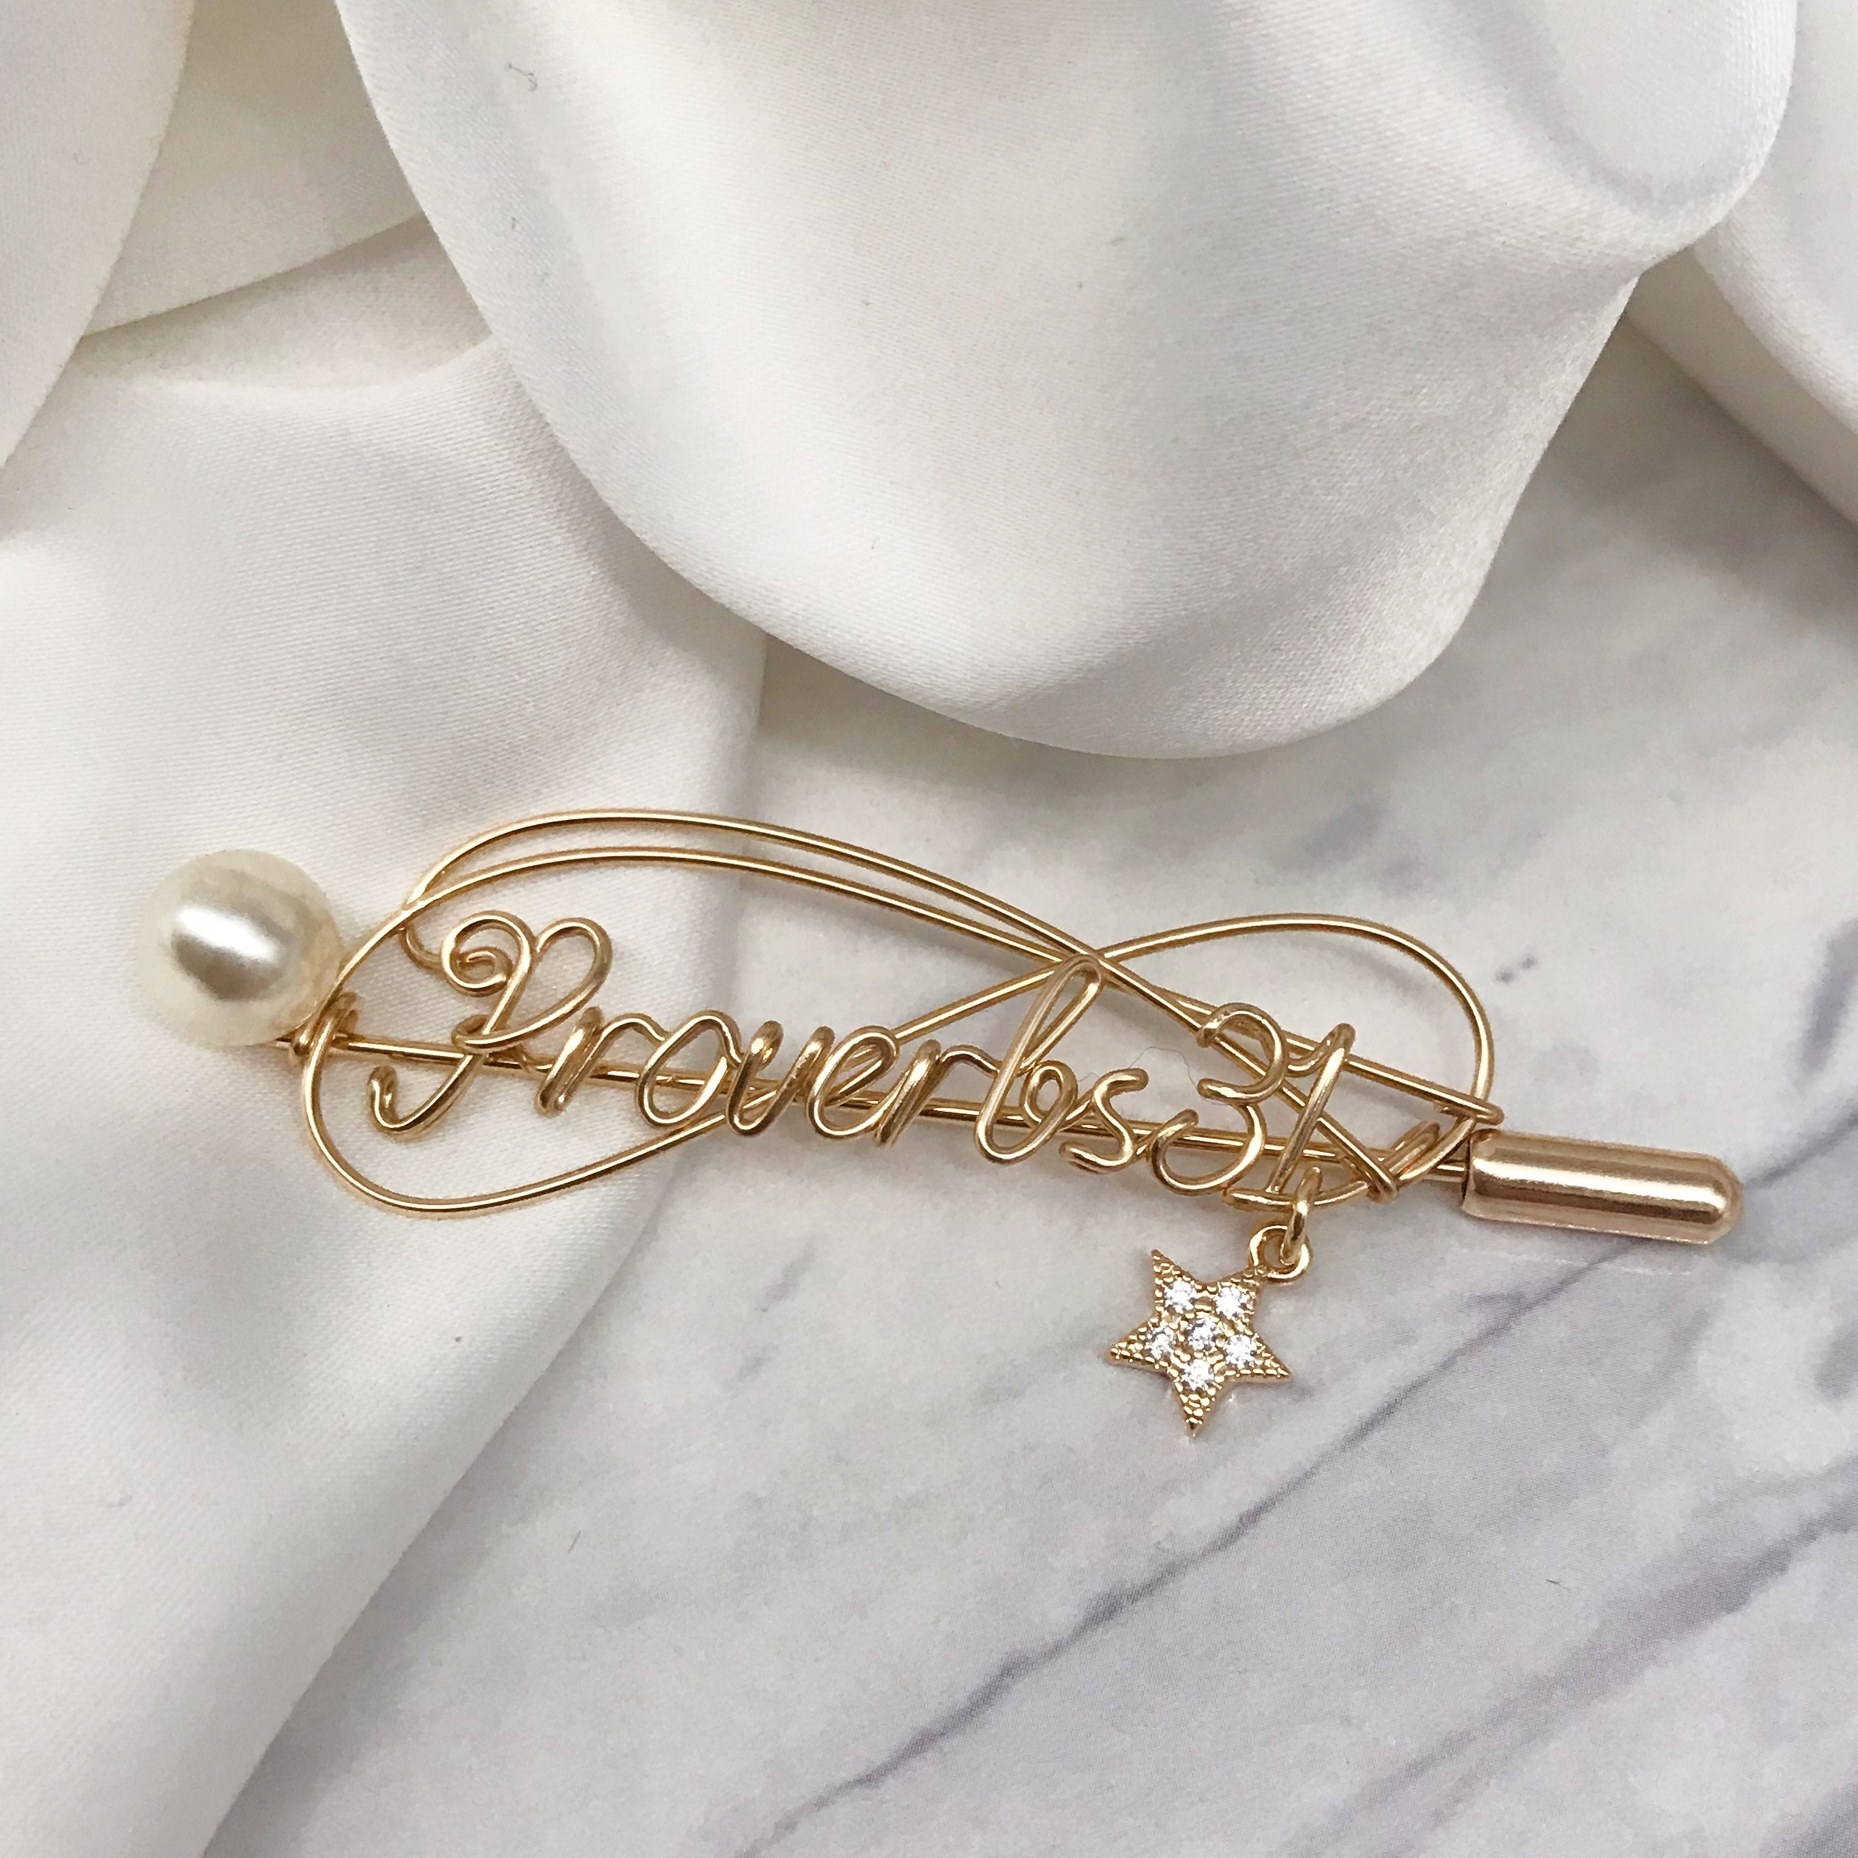 Personalized Wire Name Brooch With Diamond Star - The Chubby Paw 